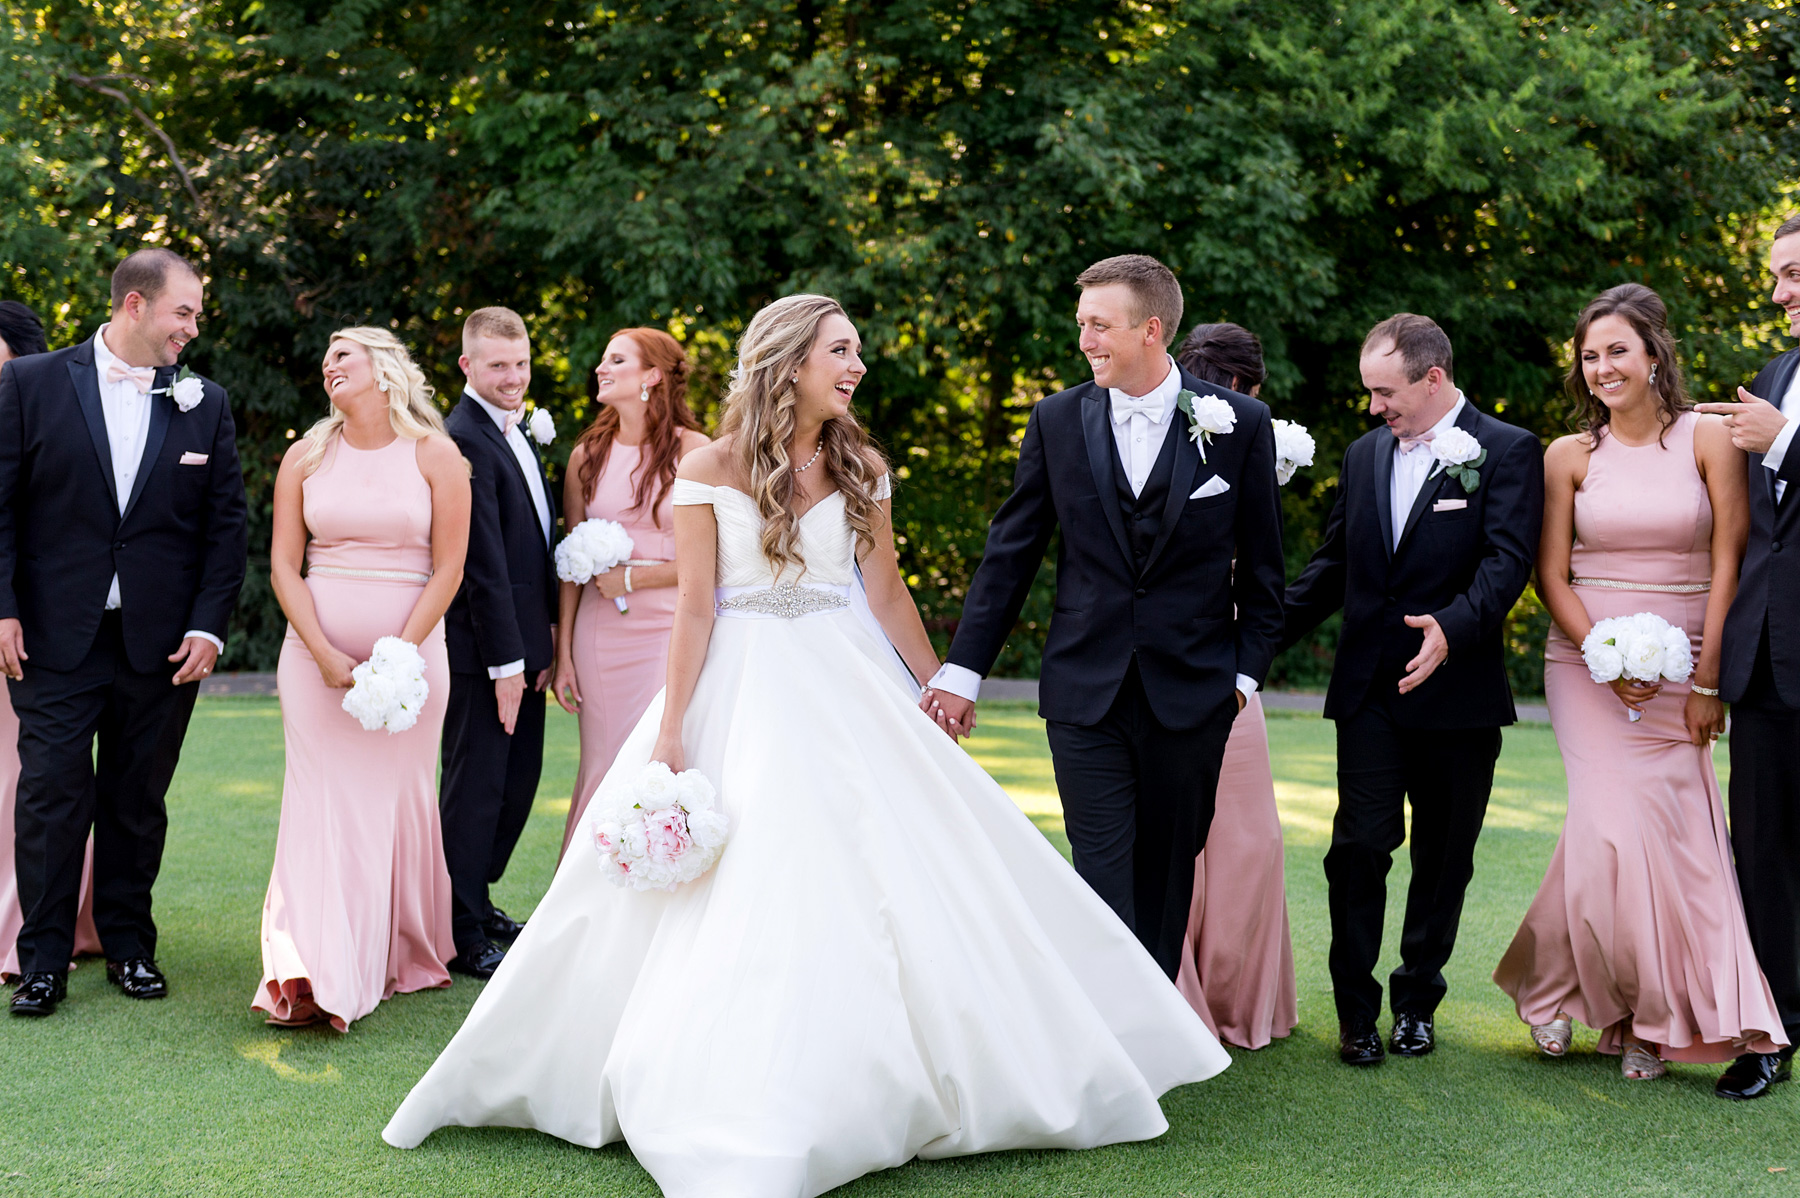 midwest destination wedding by ashley fisher photography